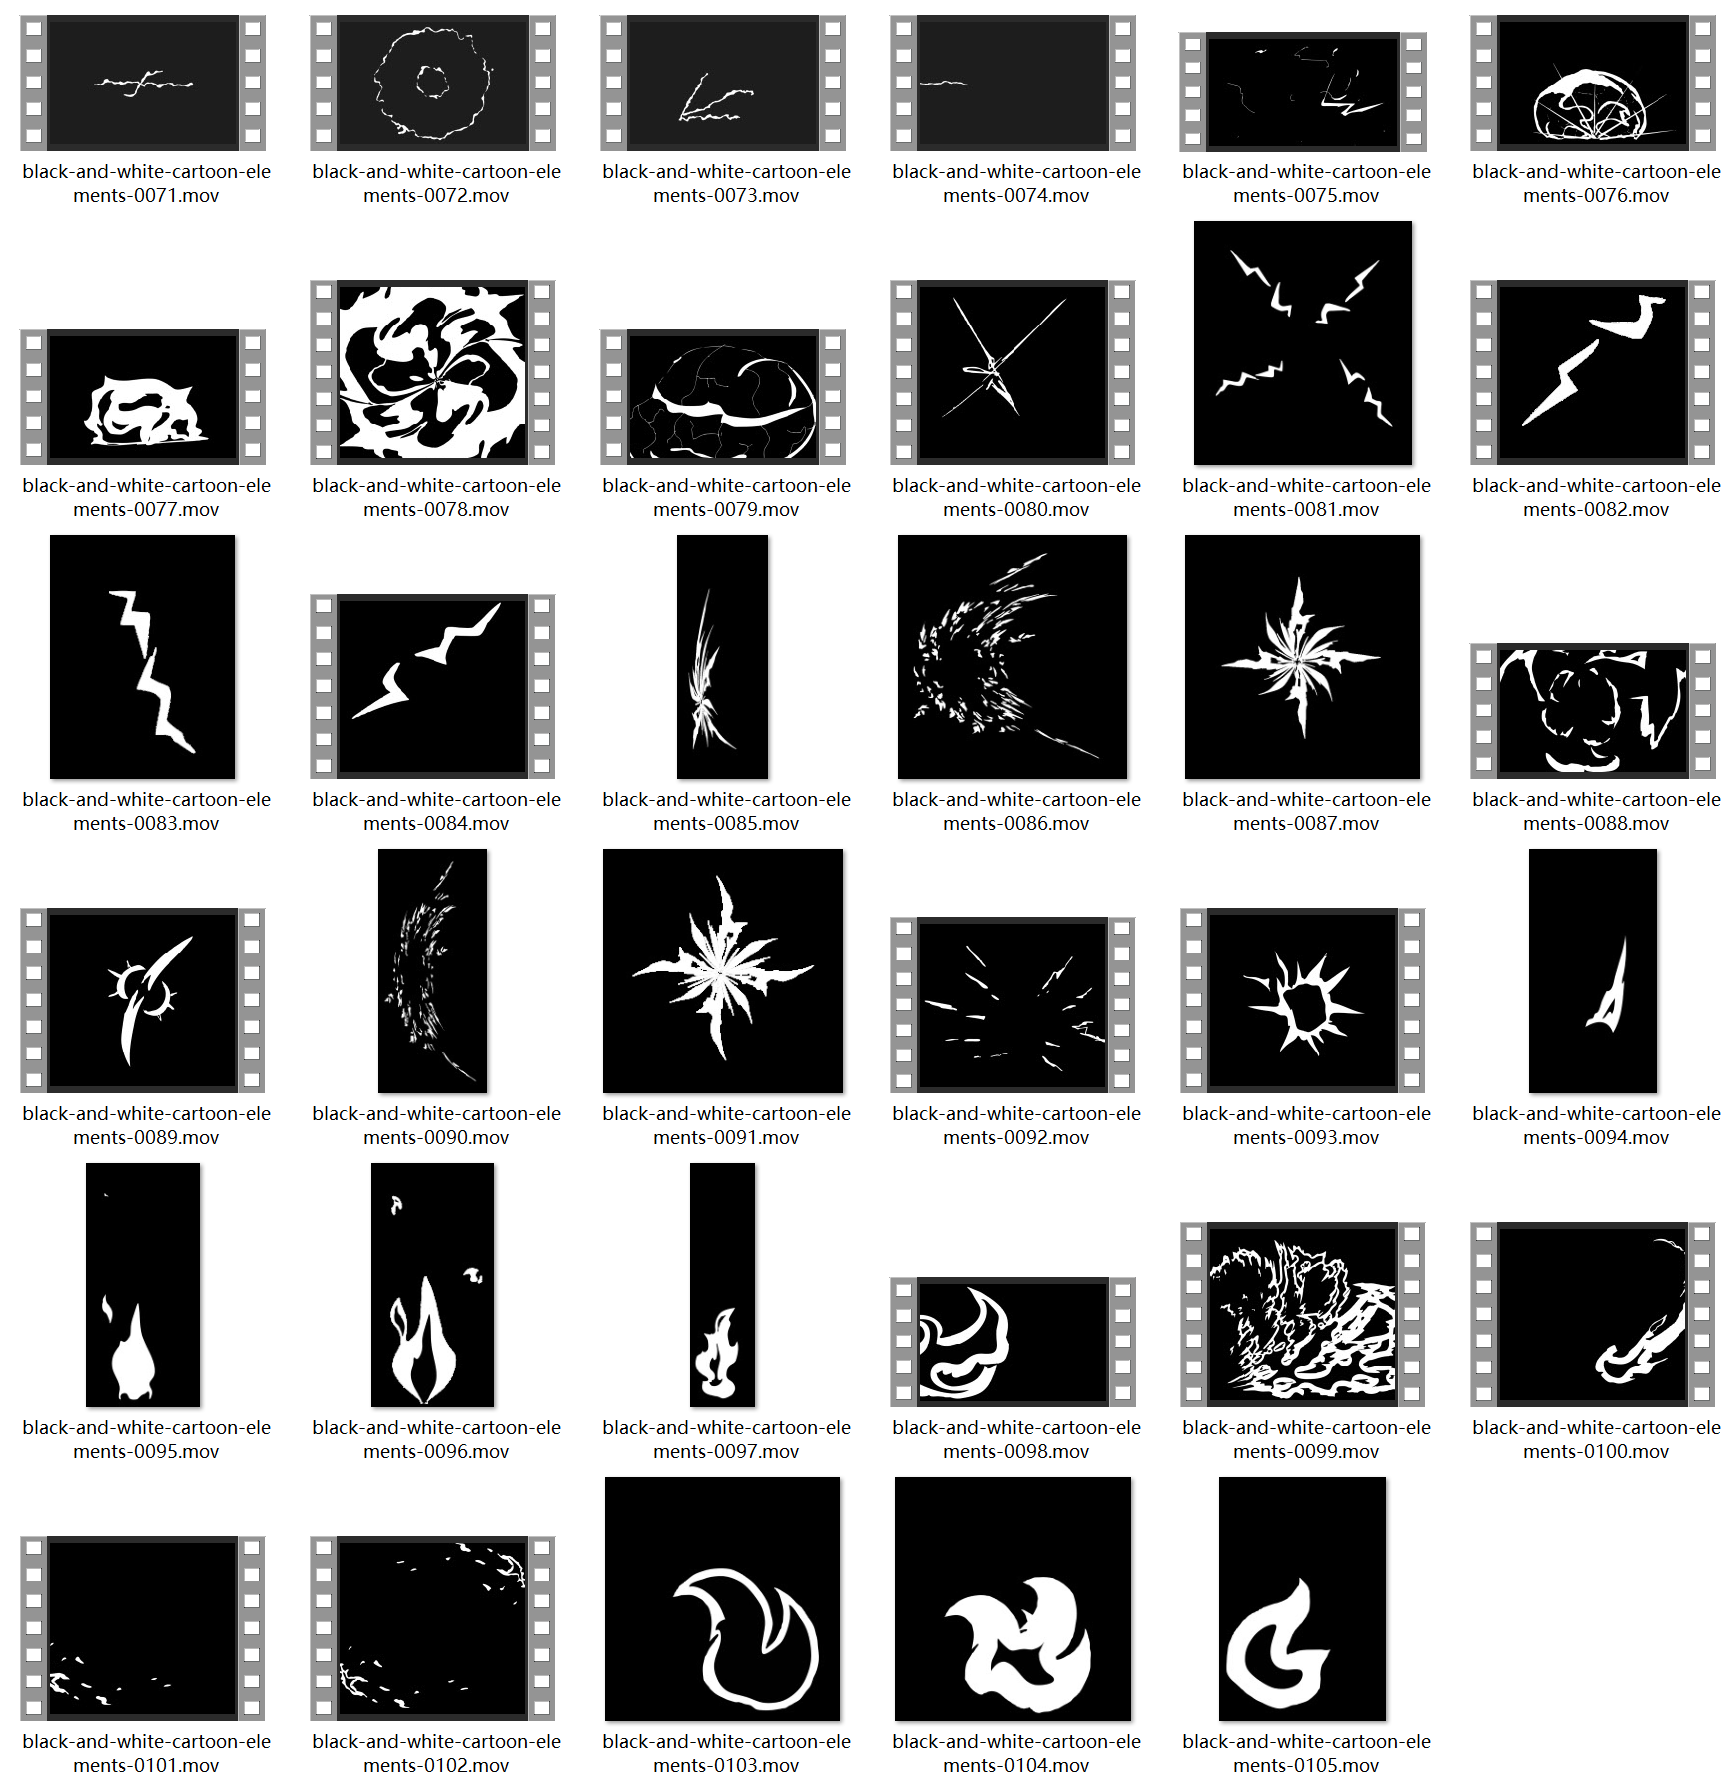 black and white cartoon elements-s0220003a1